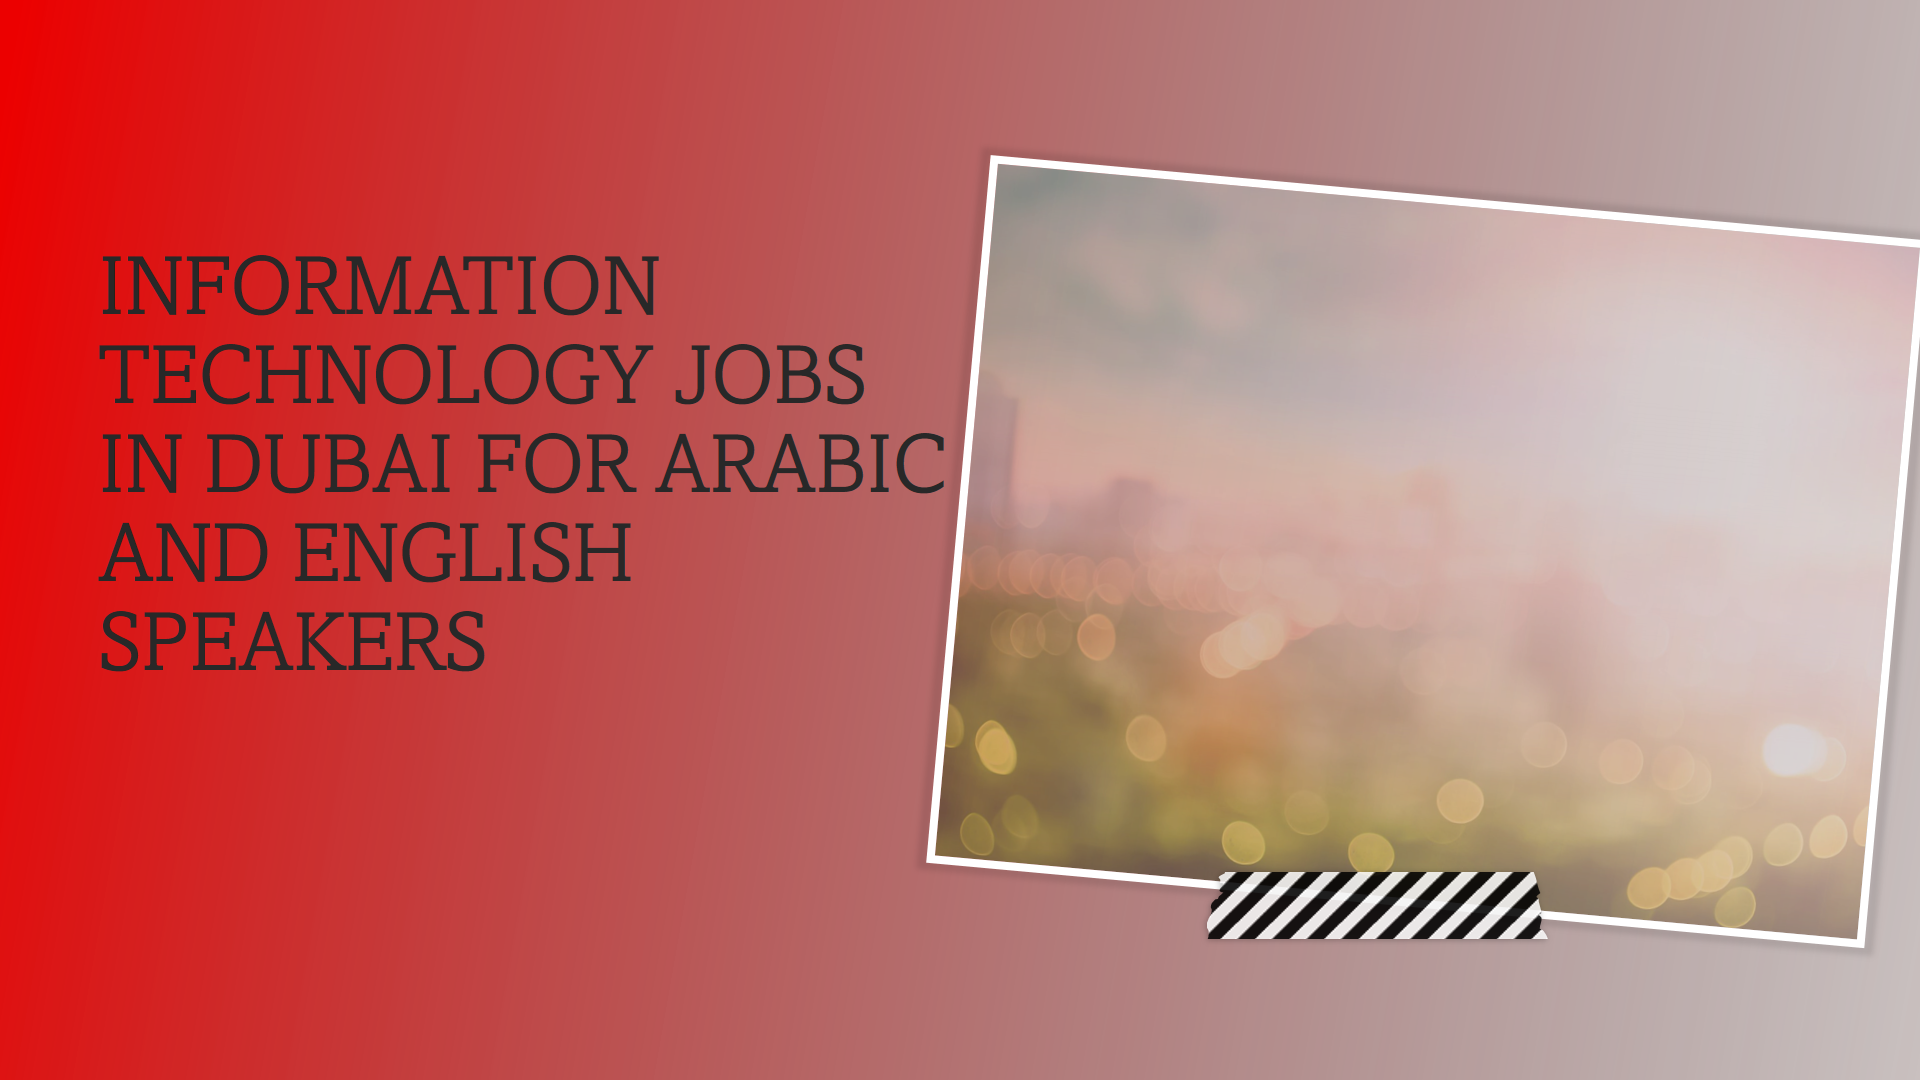 Information Technology jobs in Dubai for Arabic and English speakers